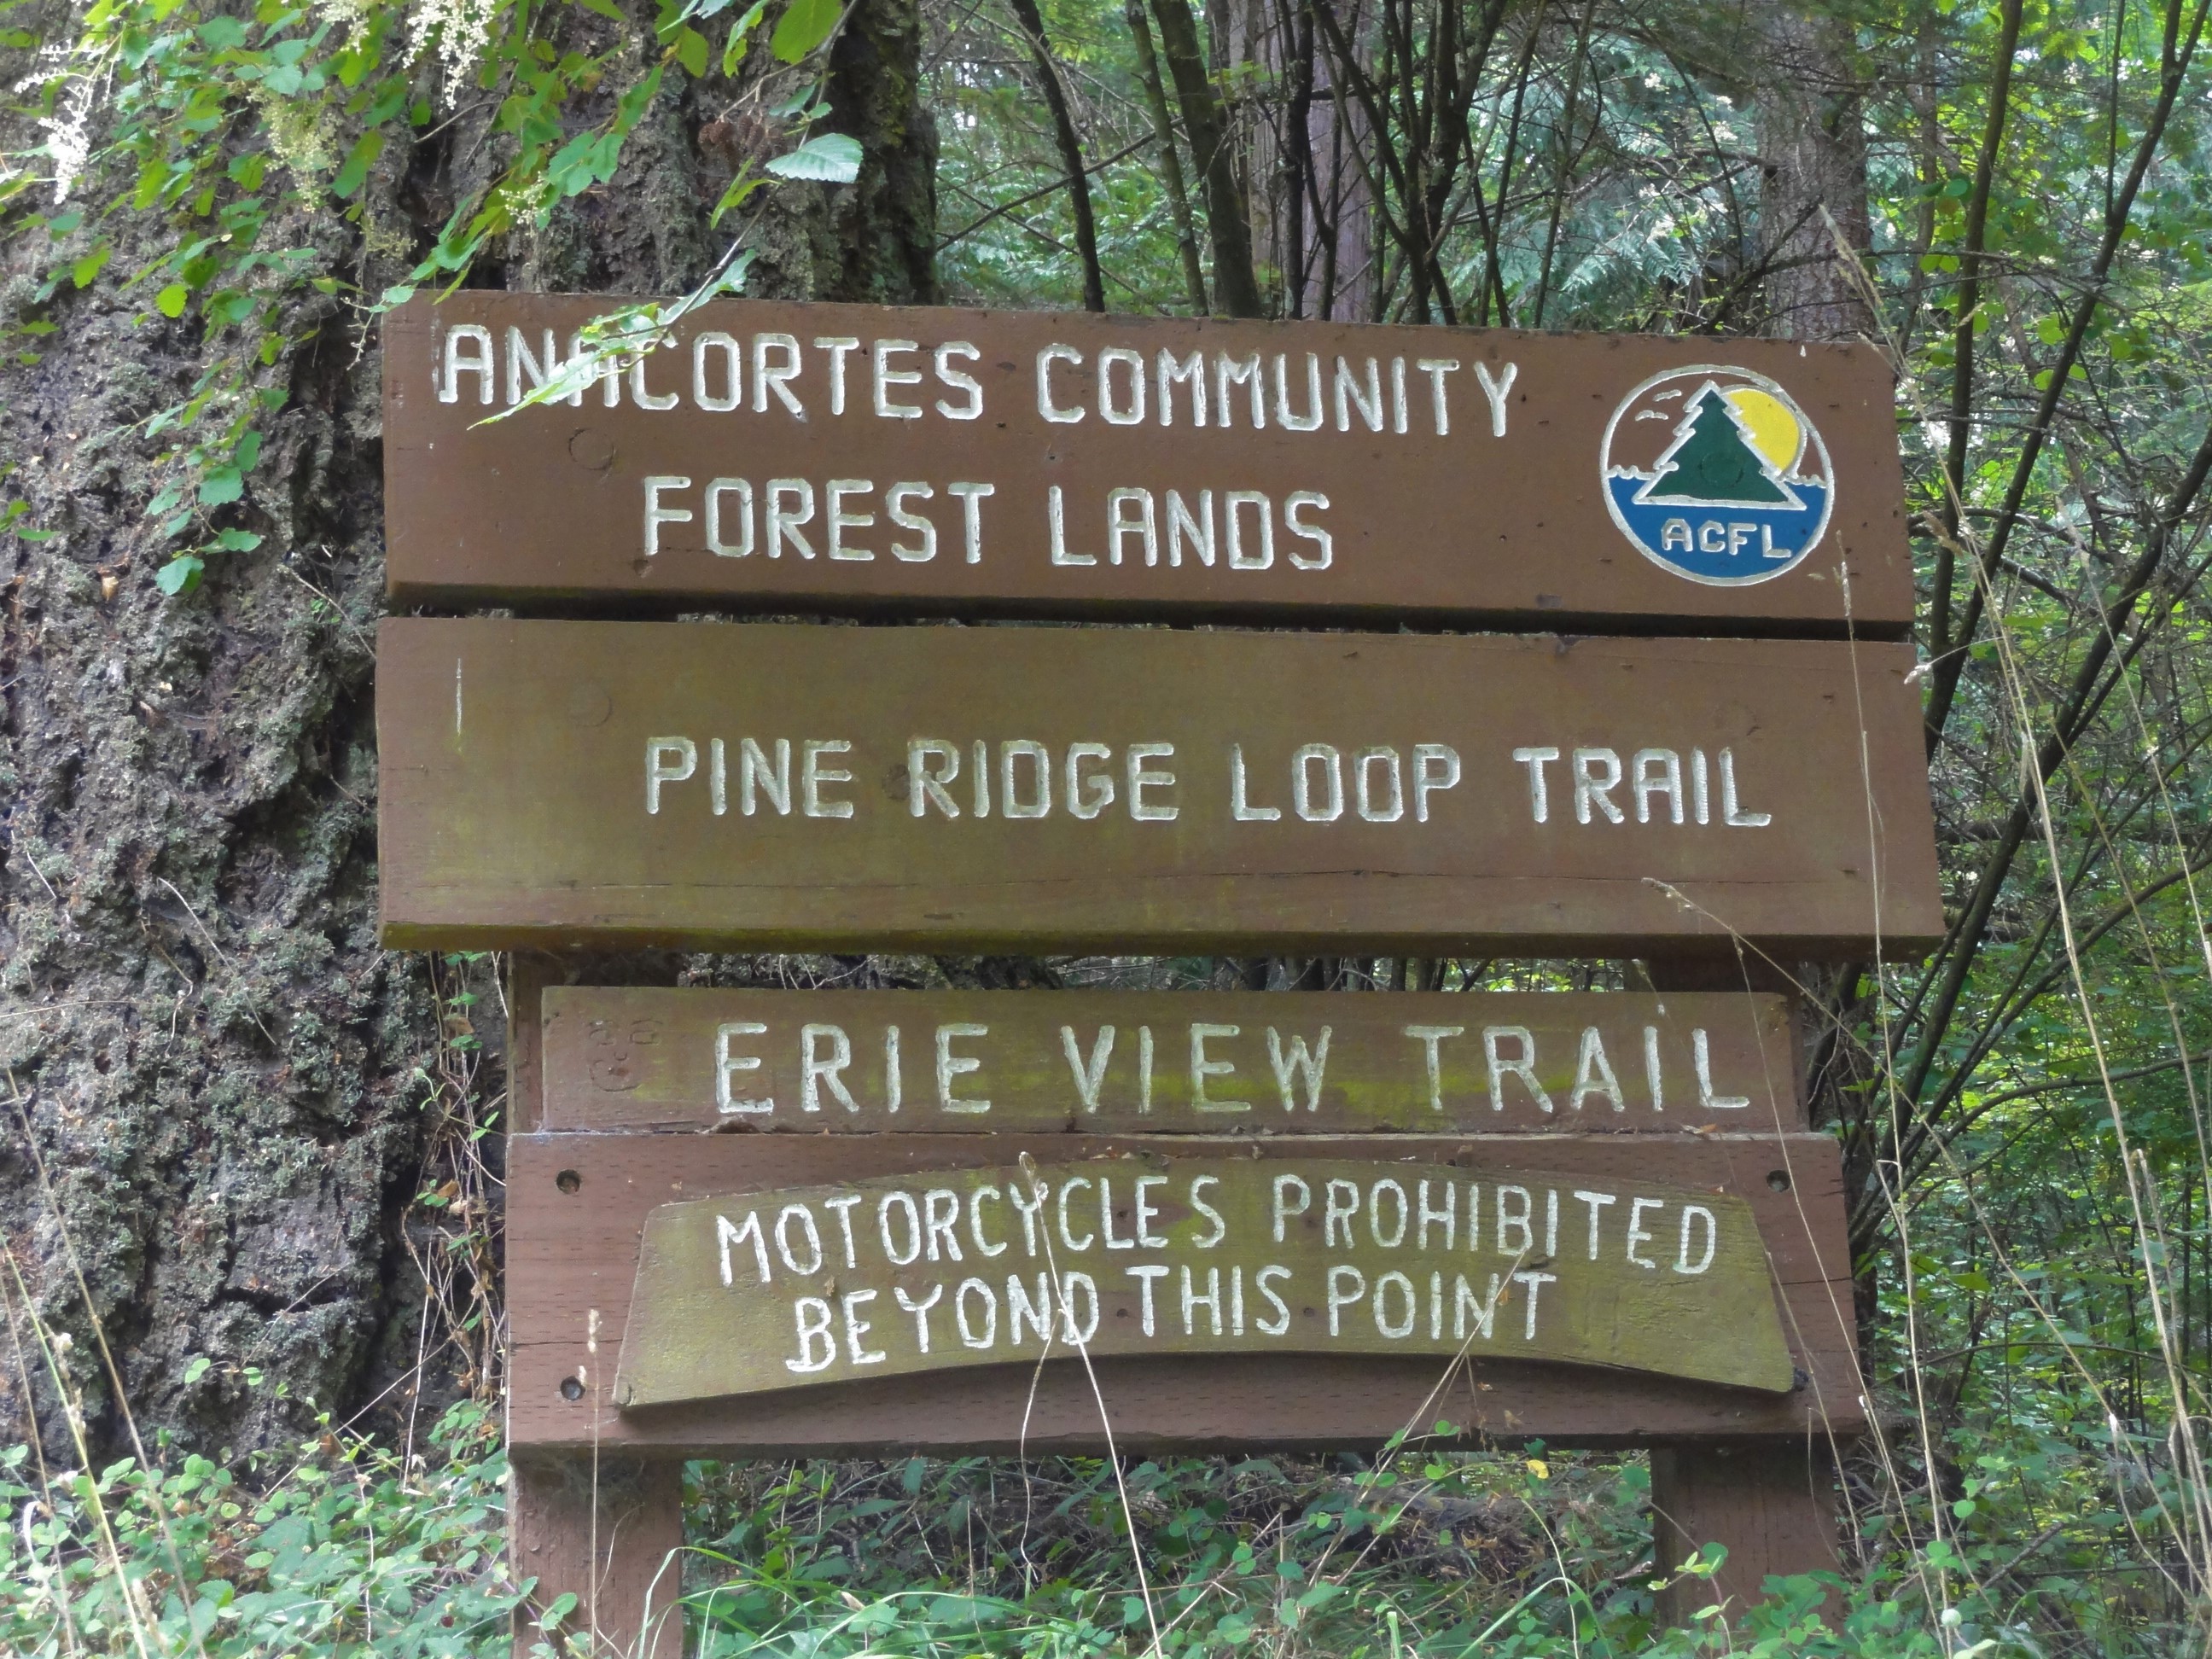 The Pine Ridge loop is a popular trail in the Anacortes Community Forest Lands. Photograph credit: Skagit Land Trust staff.